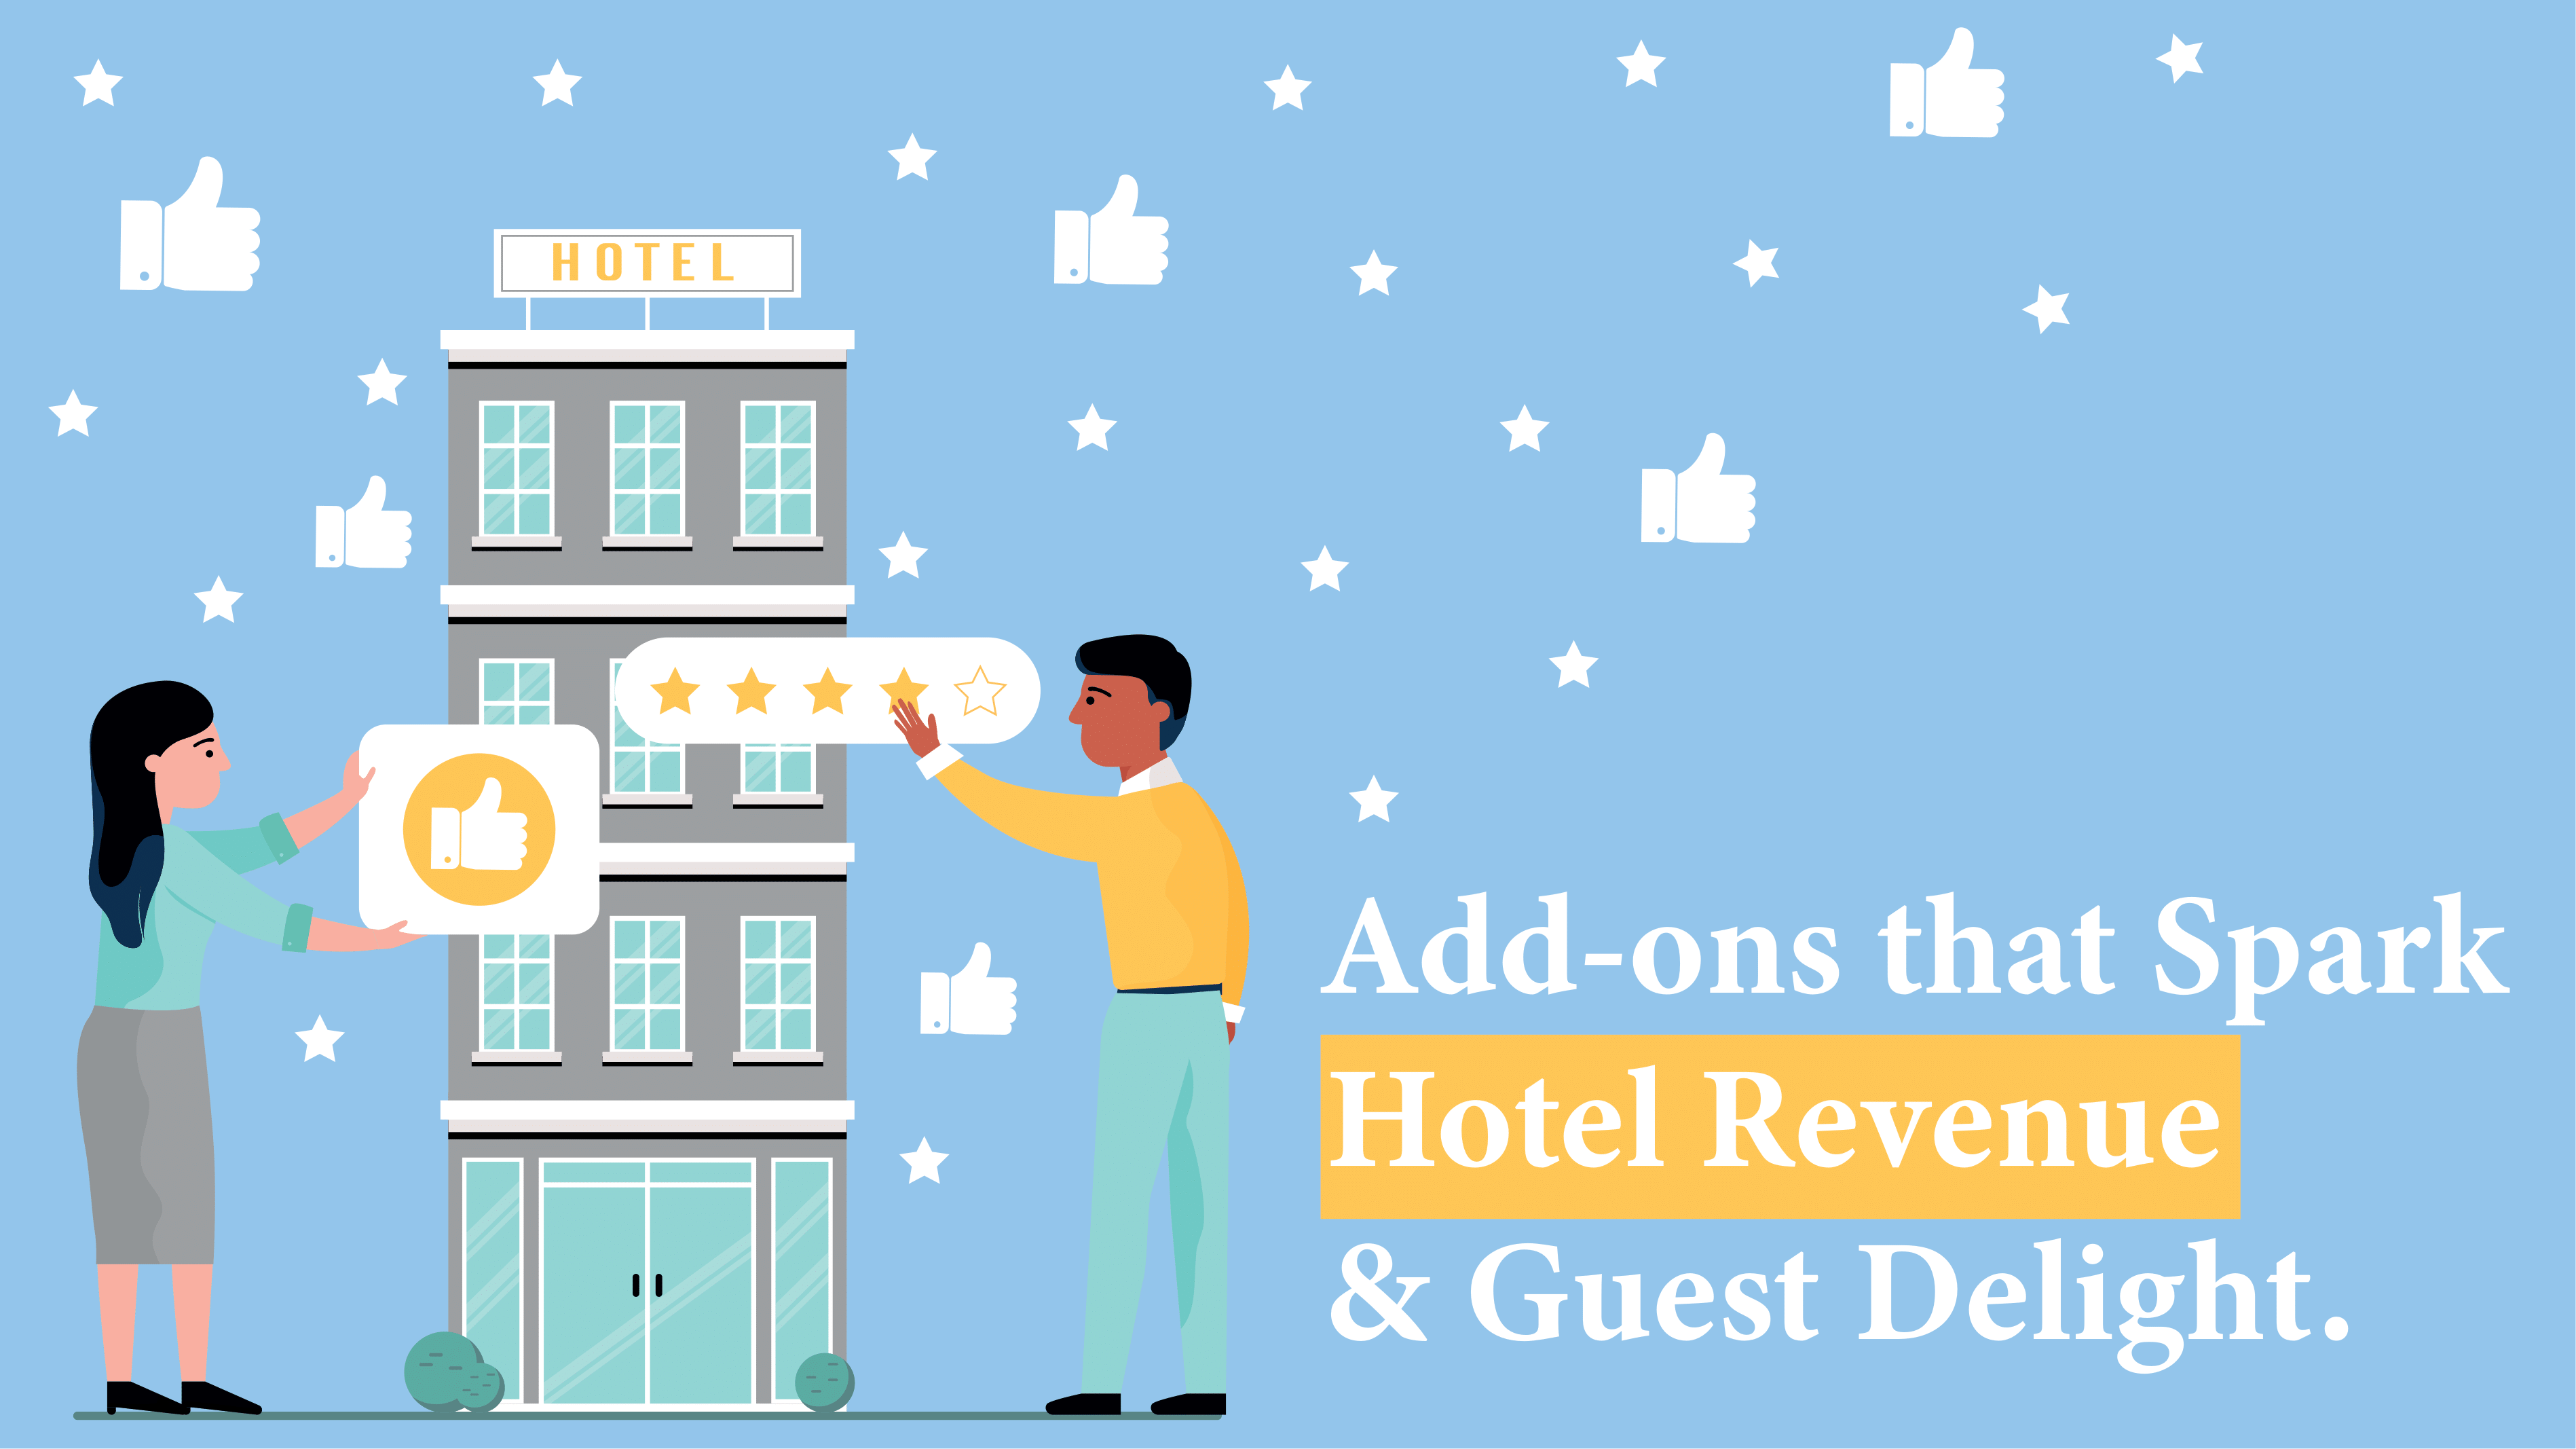 Add-on Services that Can Increase Hotel Revenue